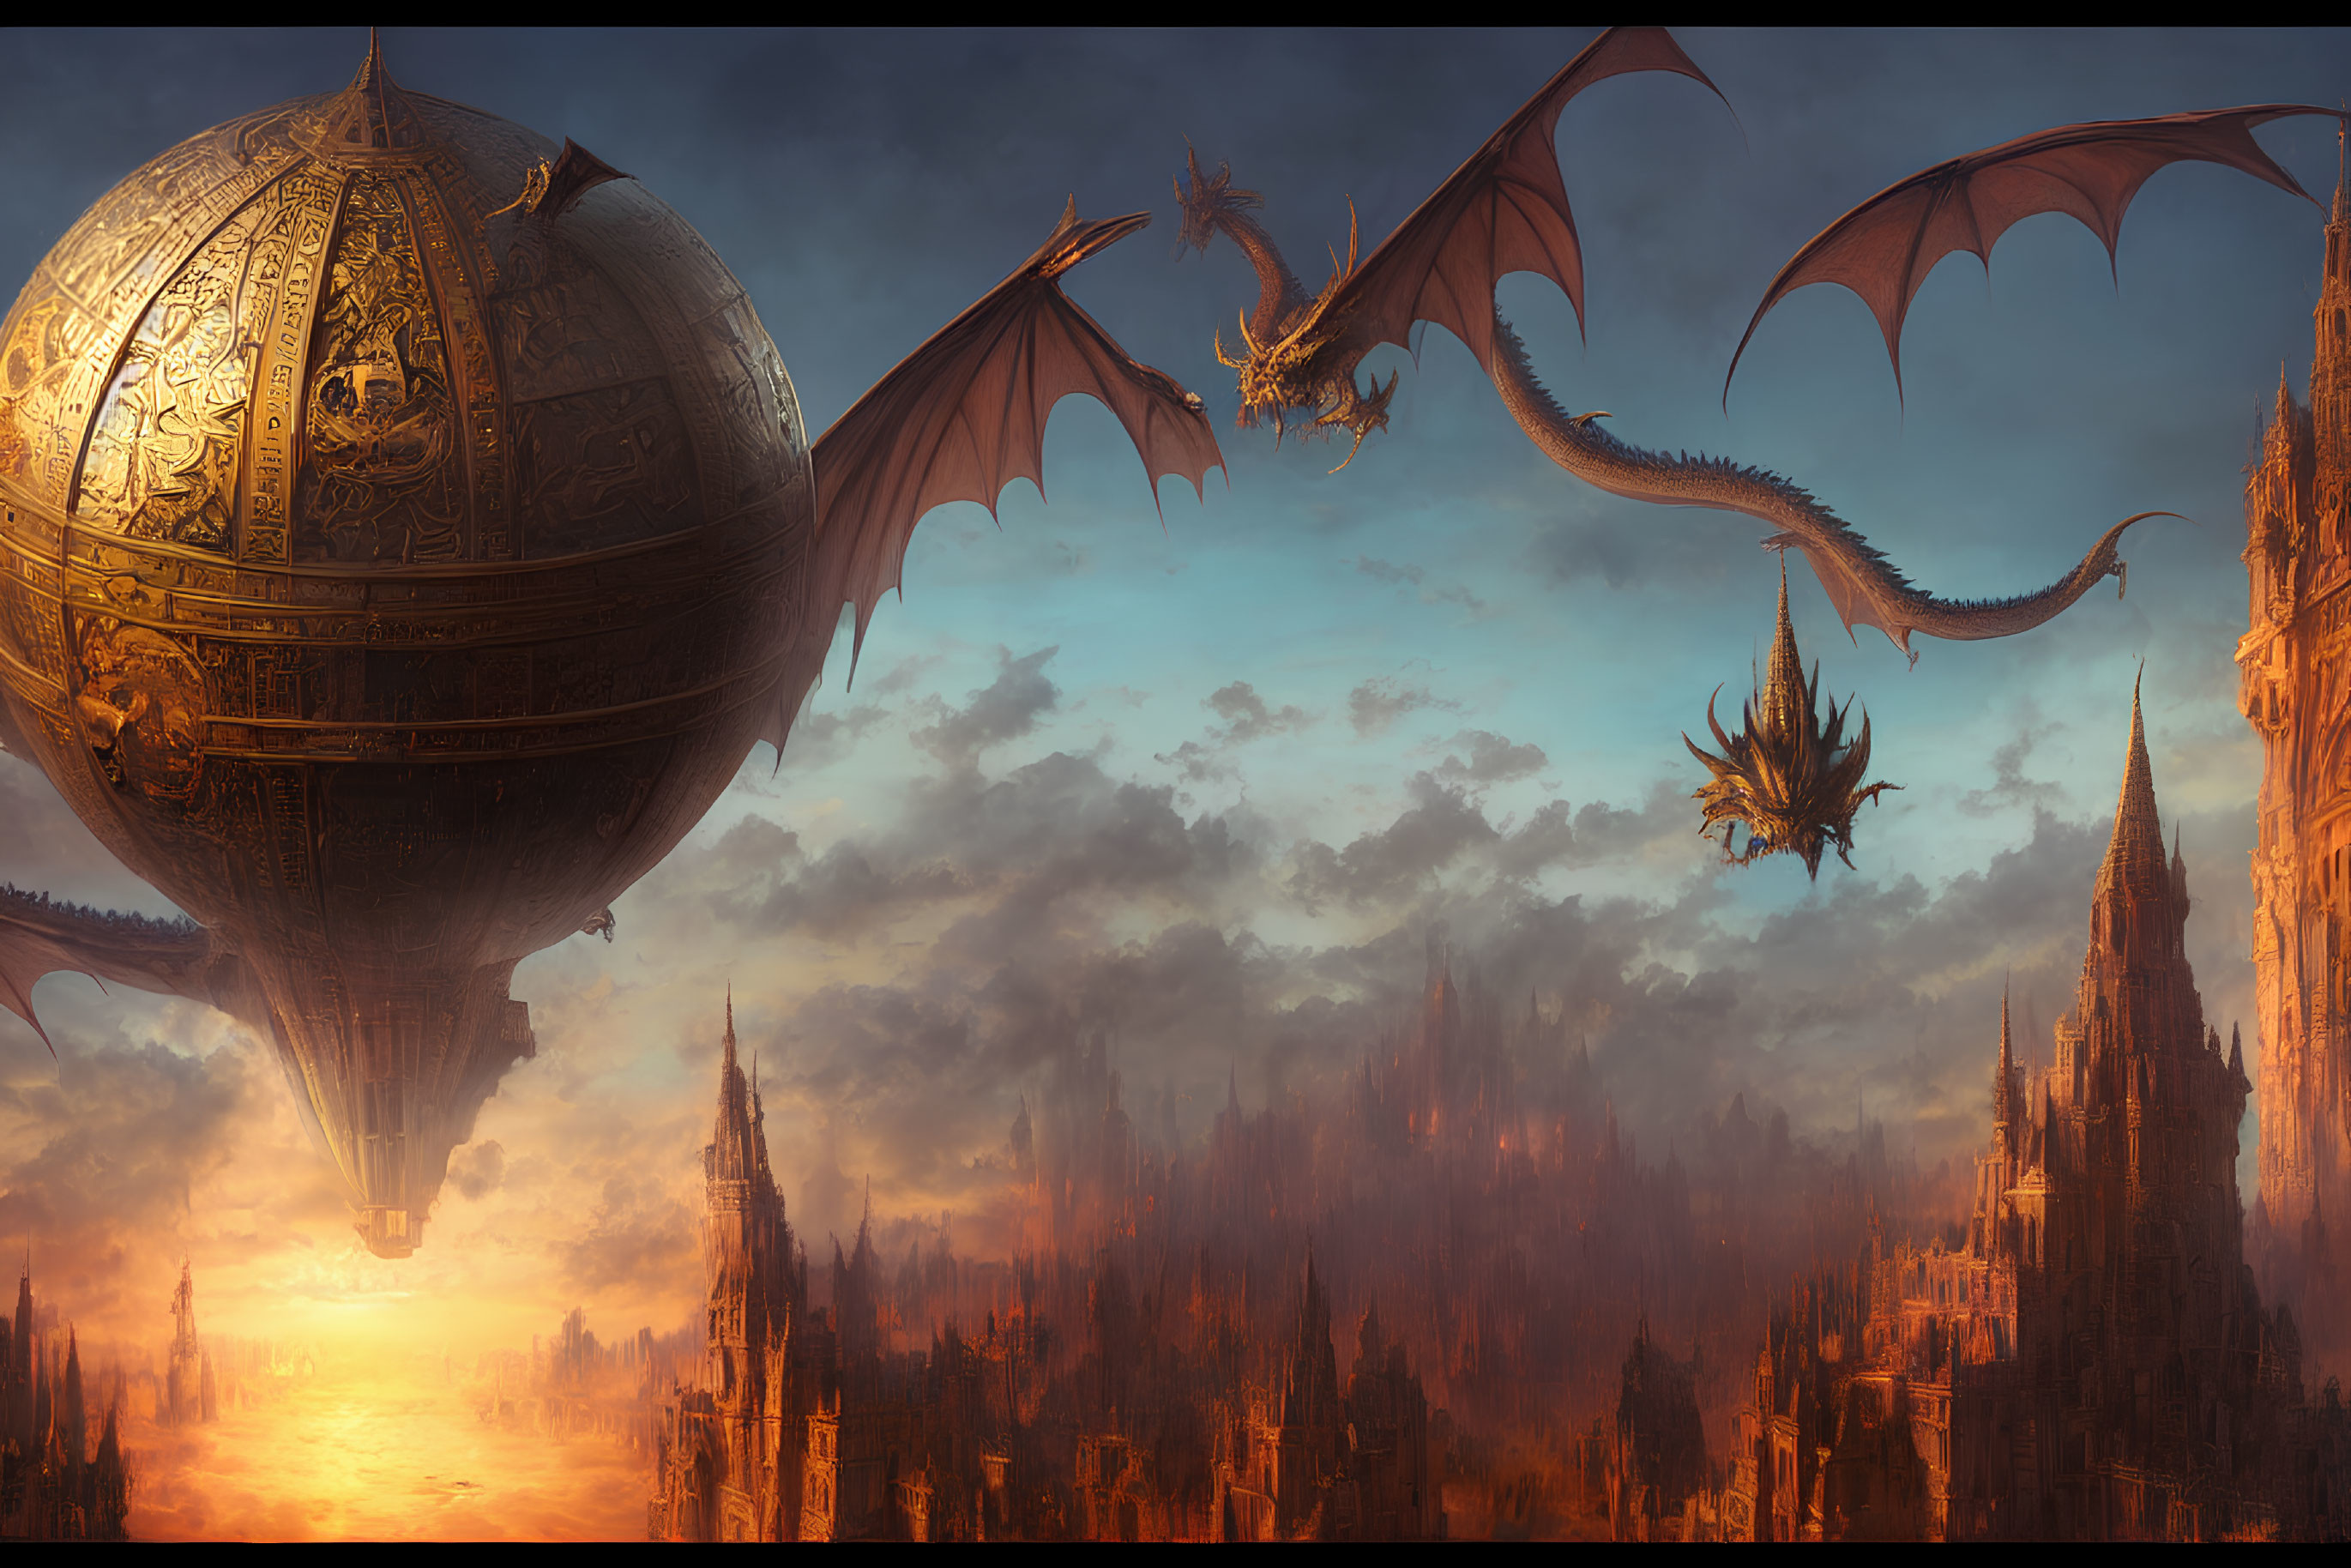 Fantastical medieval cityscape with dragons and ornate spherical airship